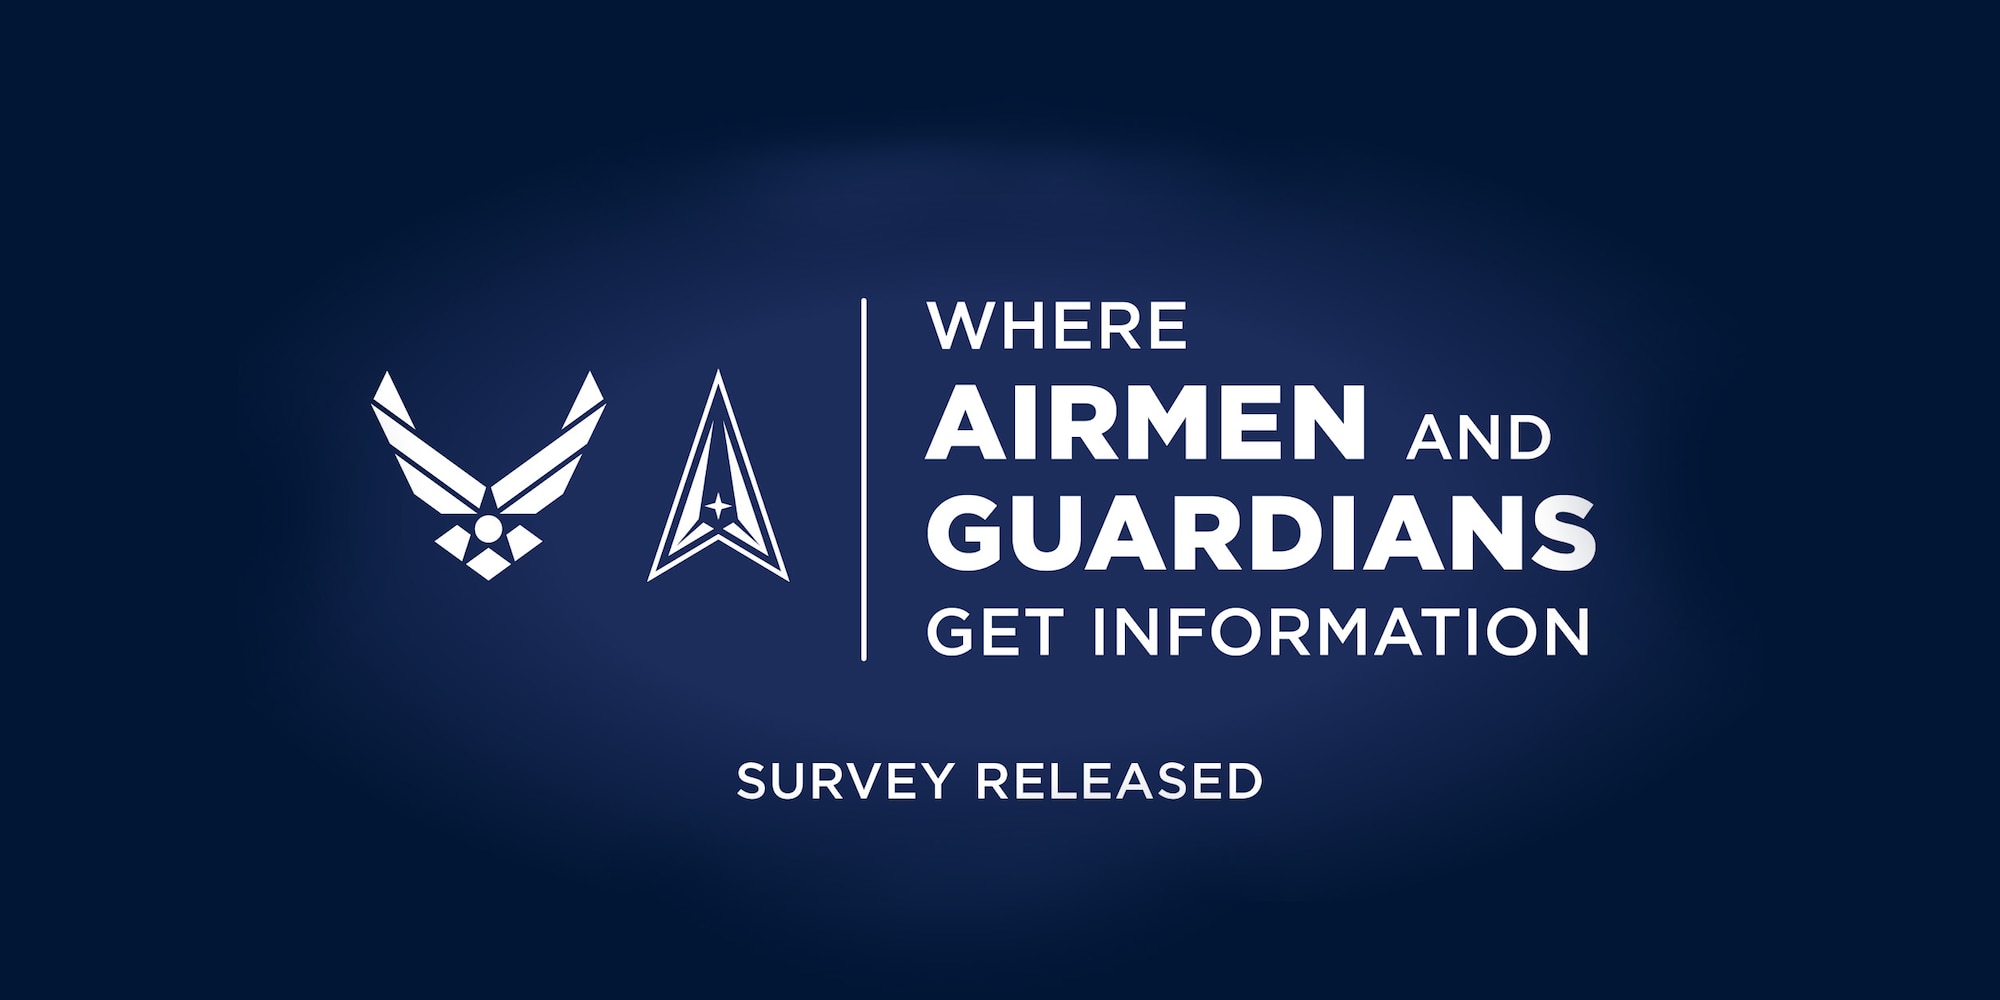 Air Force WAGGI survey released. (U.S. Air Force graphic)